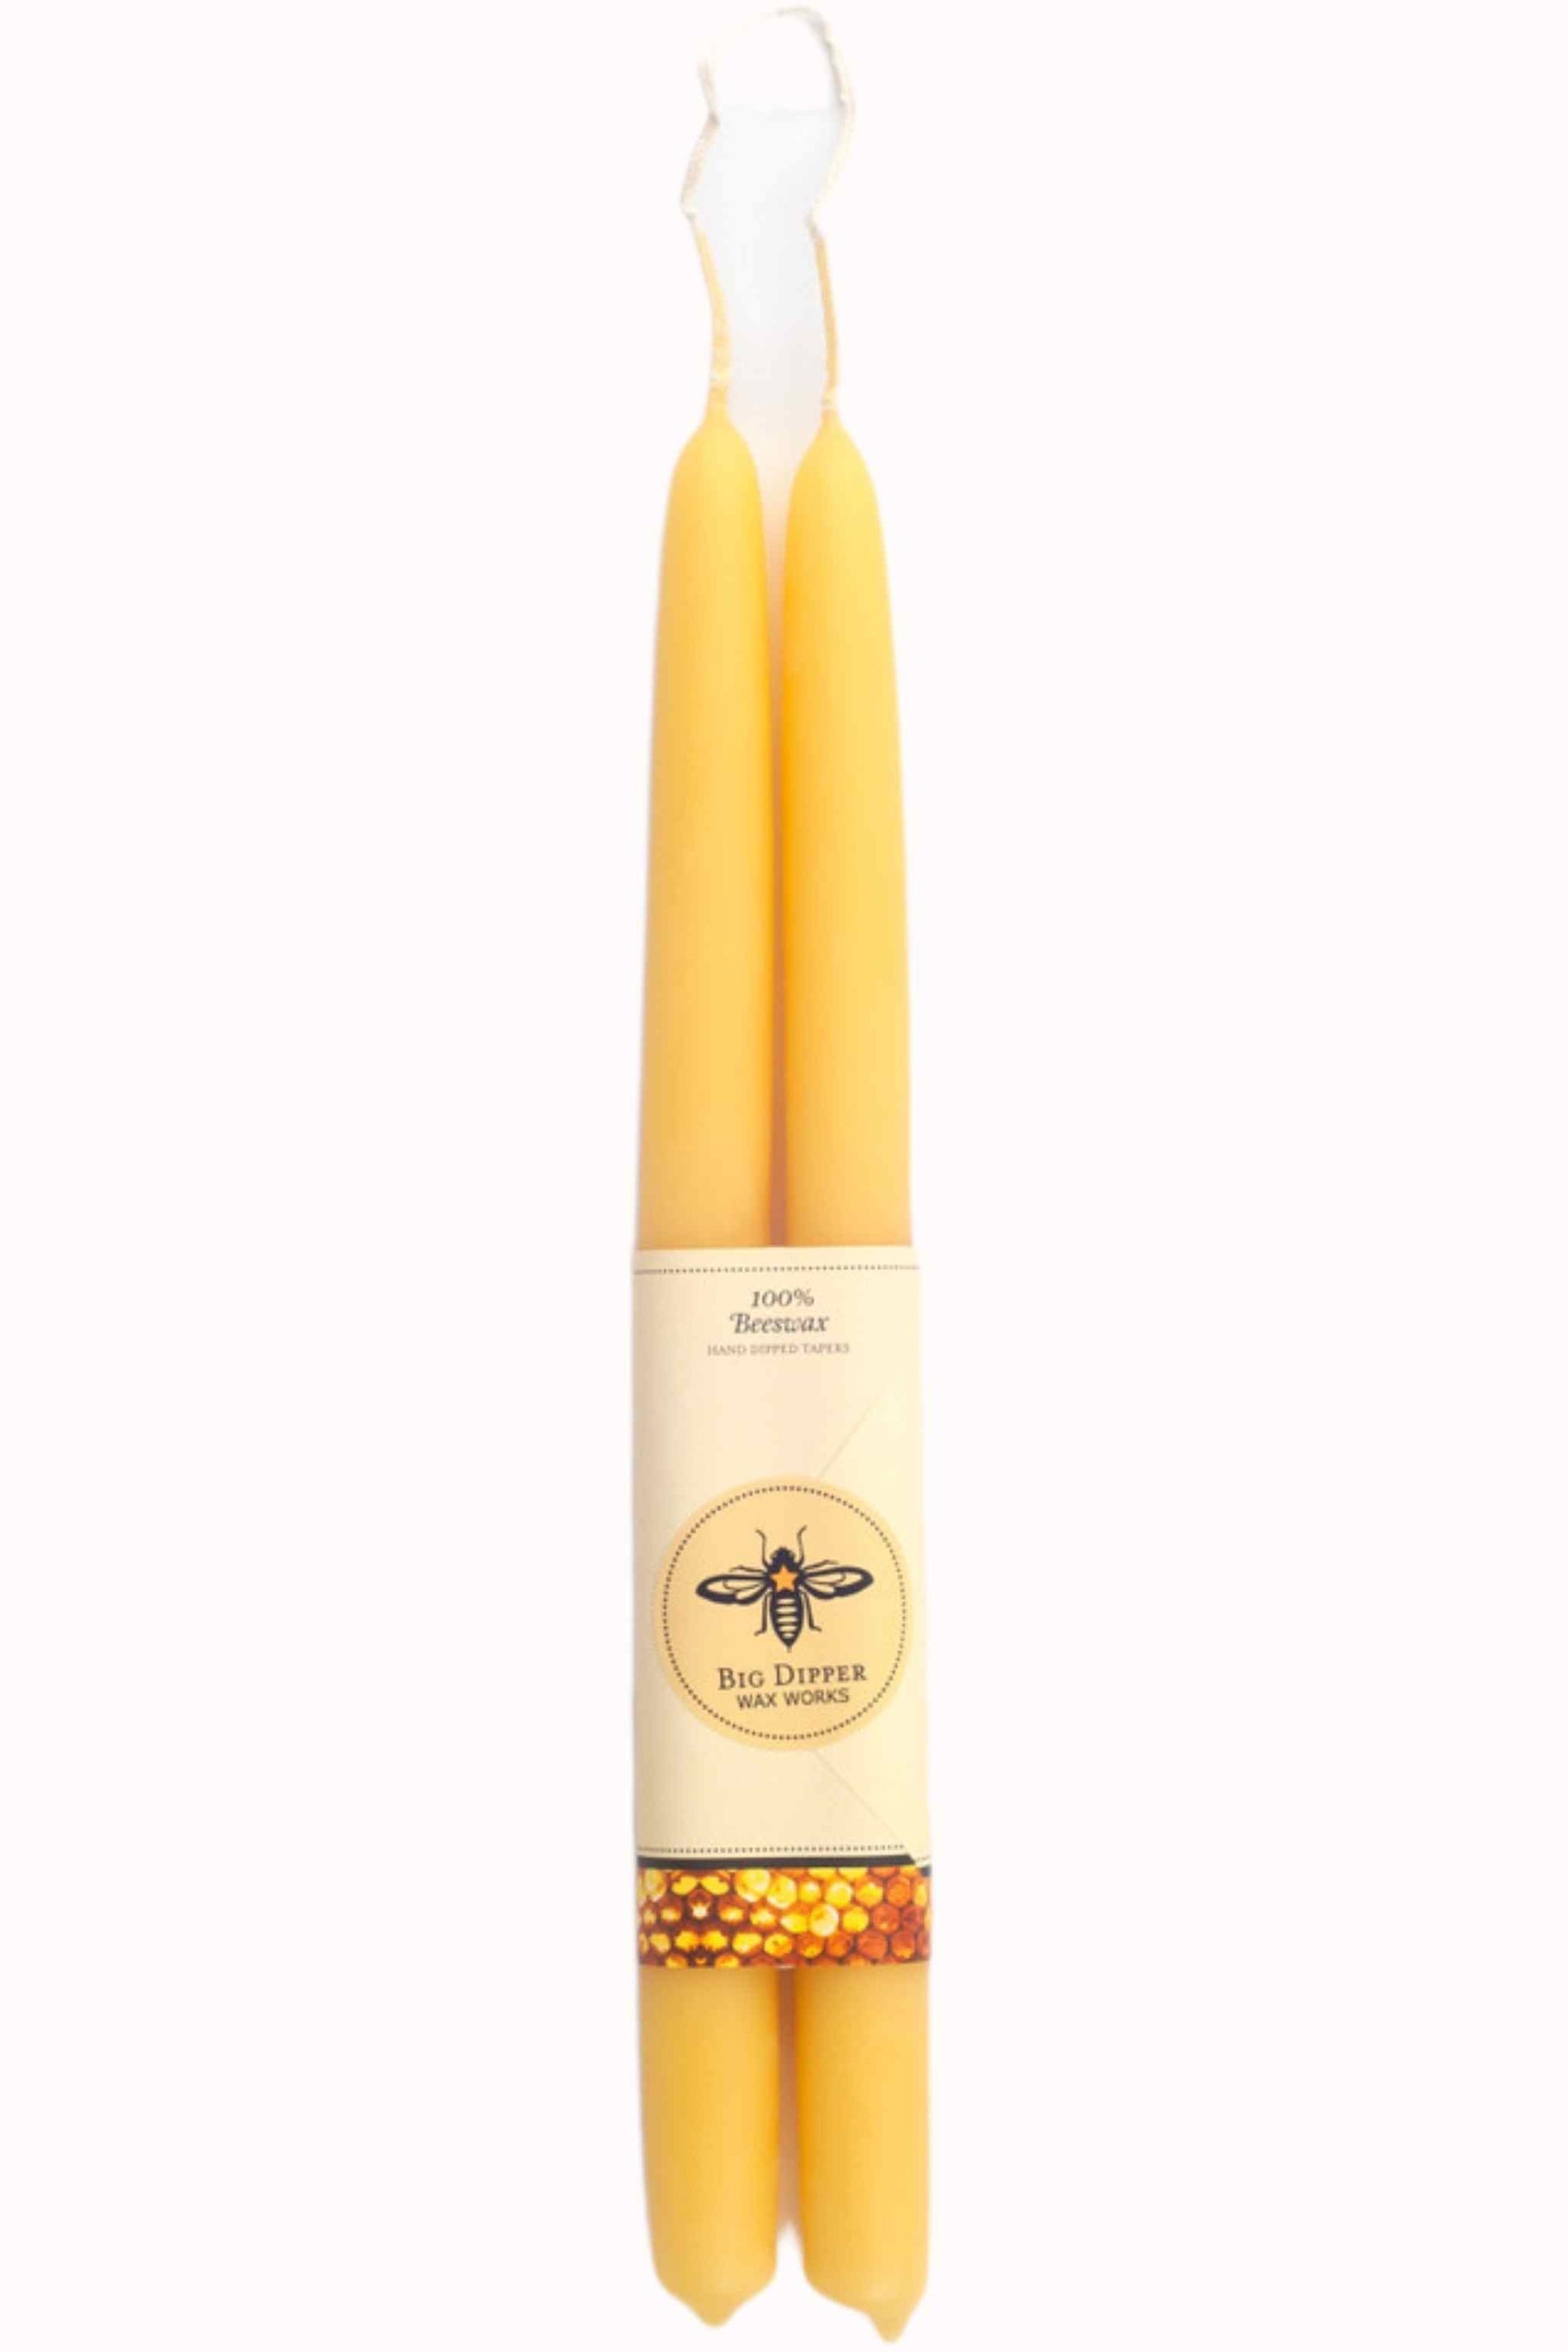 Beeswax100% natural , hand-poured beeswax candle, enhanced with dried  orange slice and cinnamon stick this is for ONE Beeswax candle.